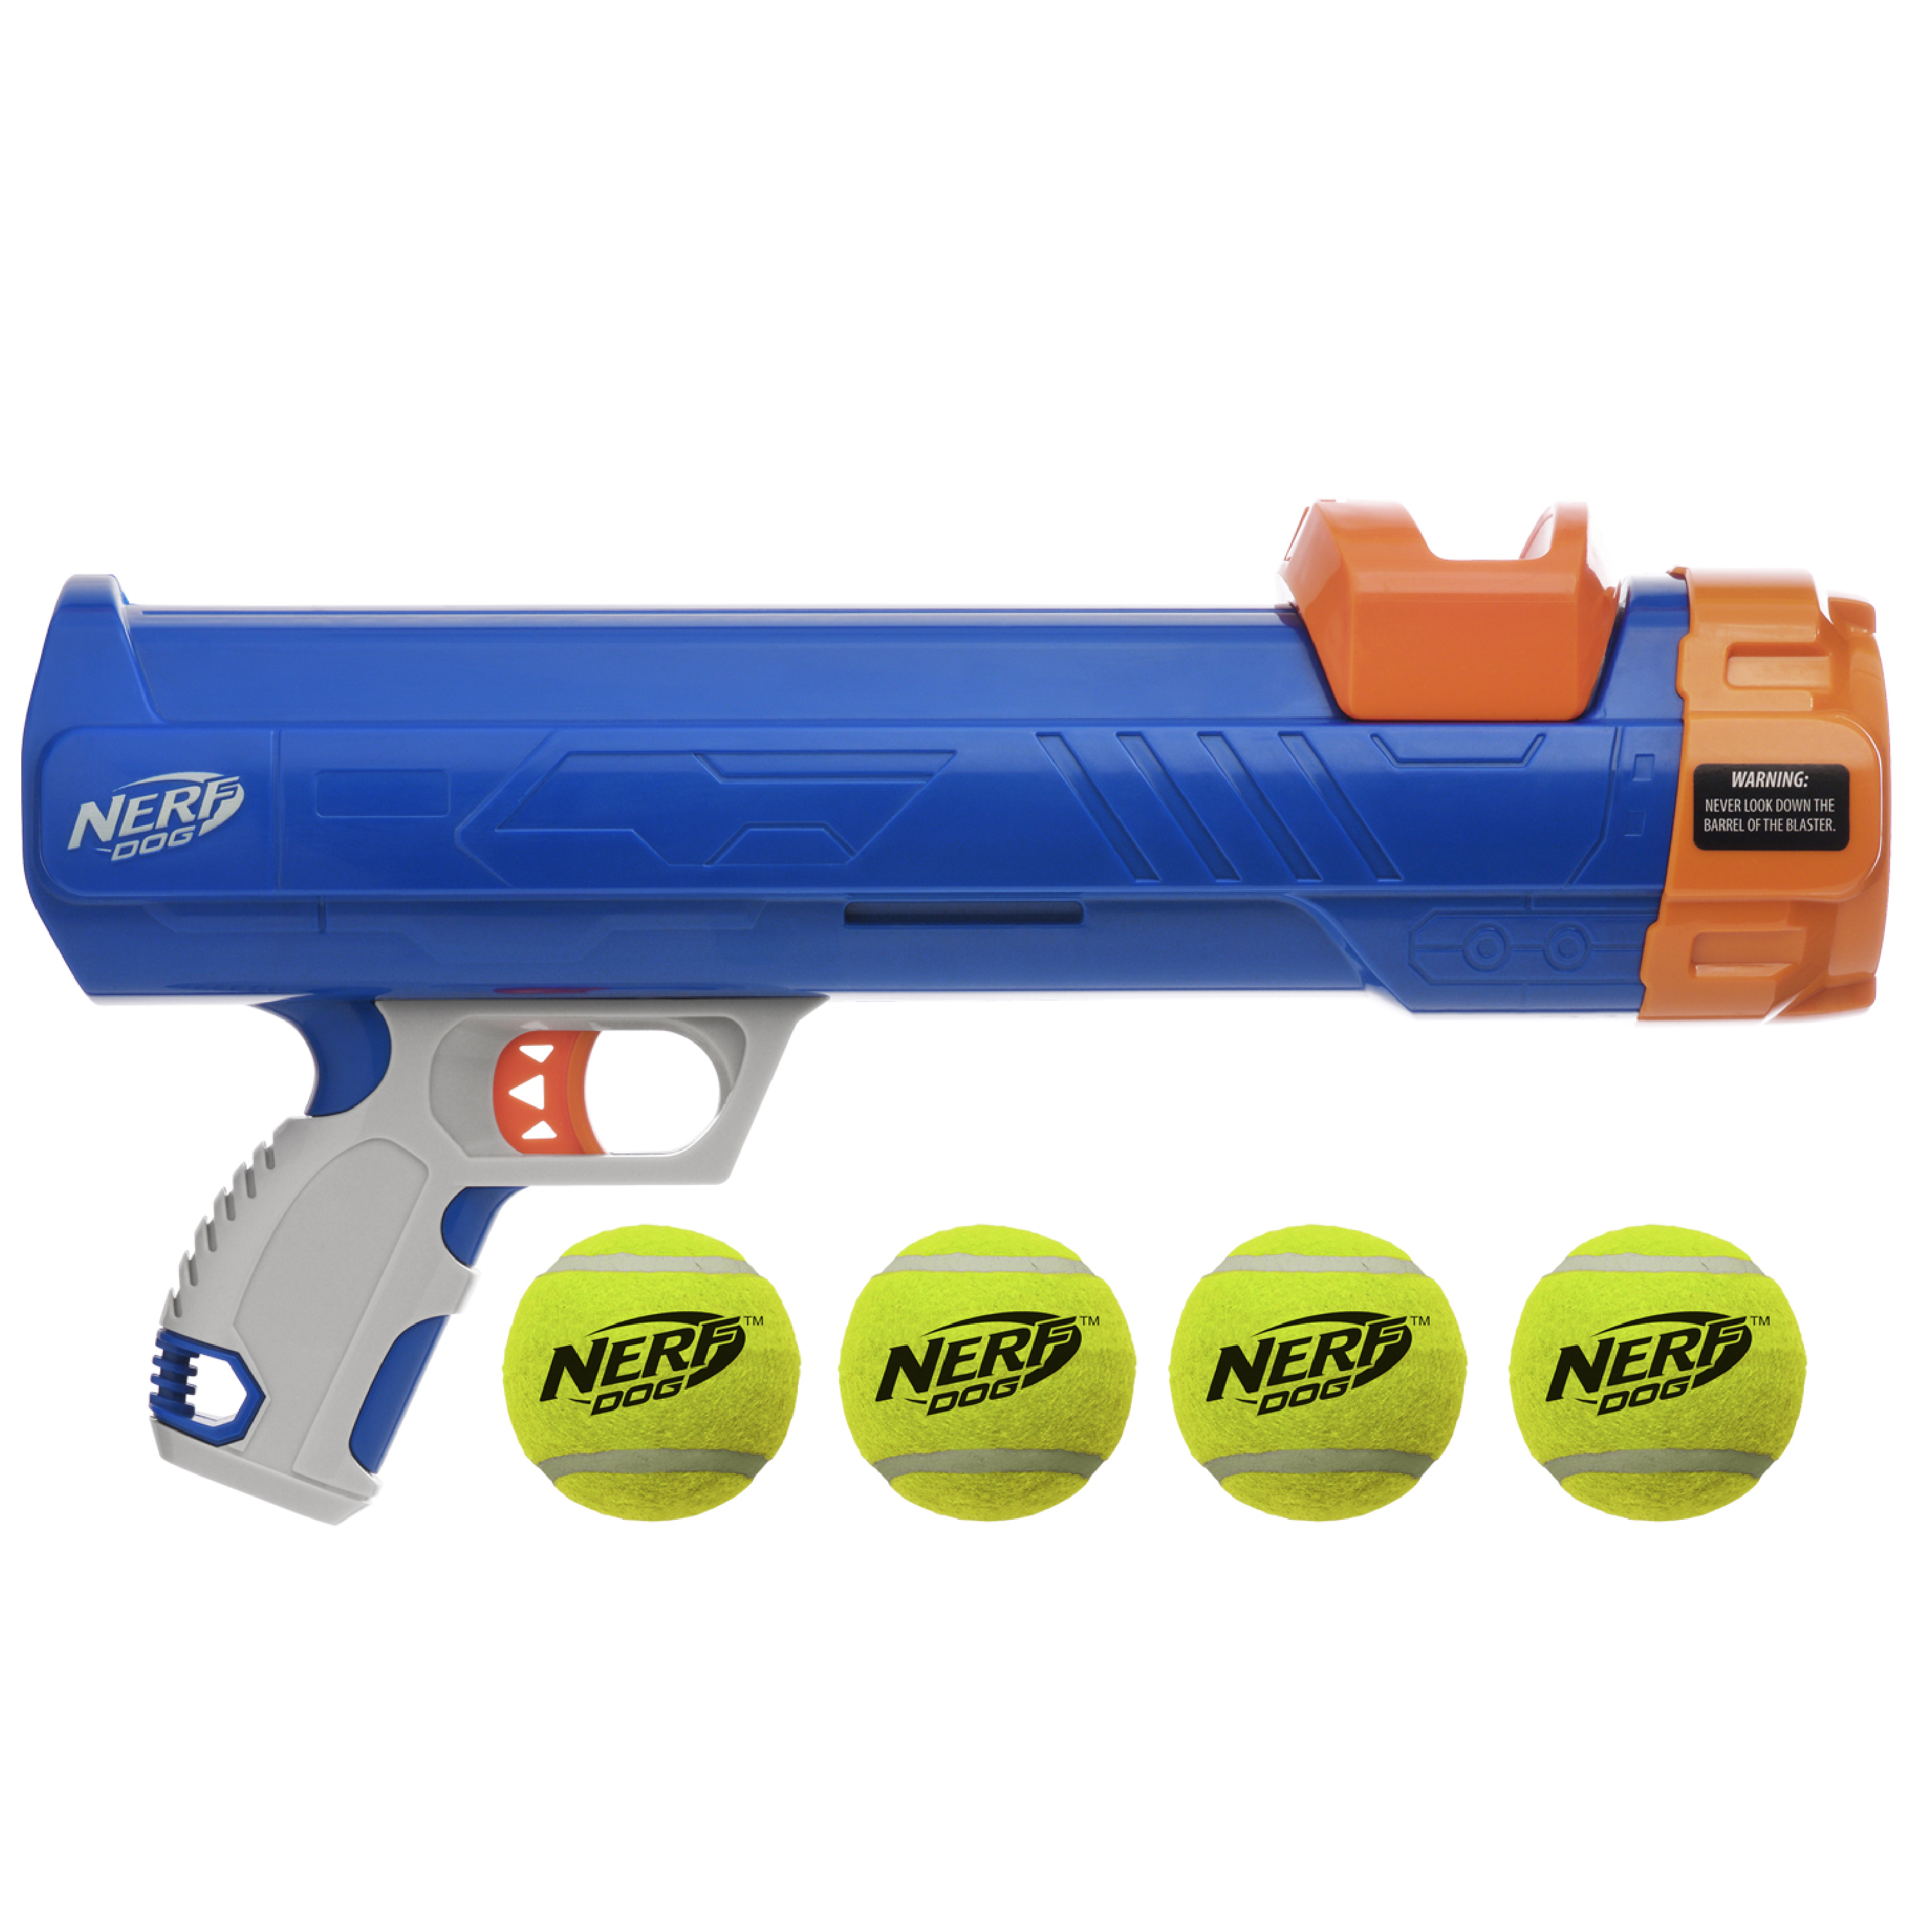 Nerf Dog 16” Tennis Ball Blaster Dog Toy with 4 Balls - image 6 of 8